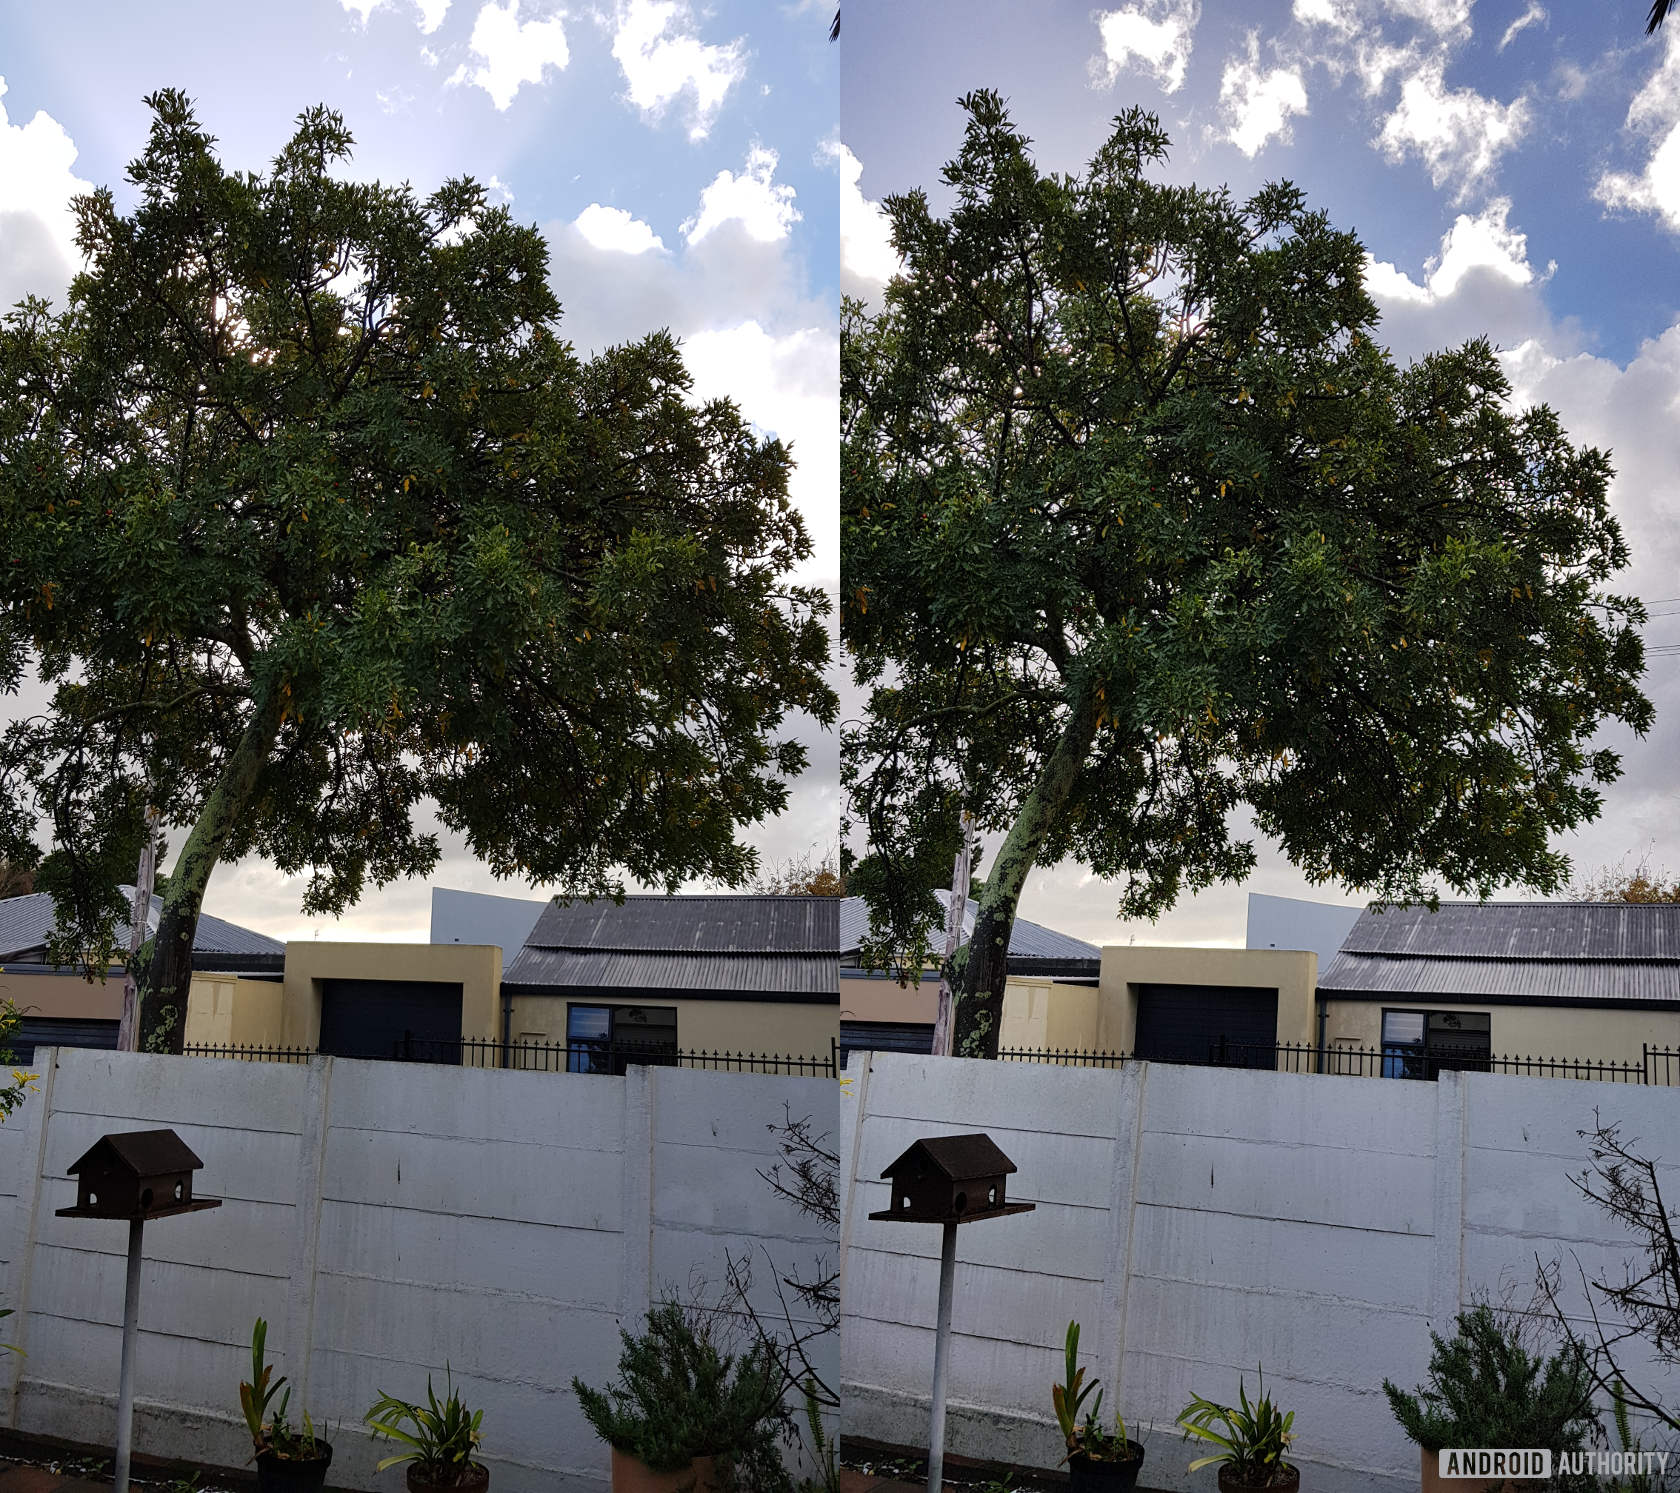 A comparison between an HDR image (R) and a standard photo.